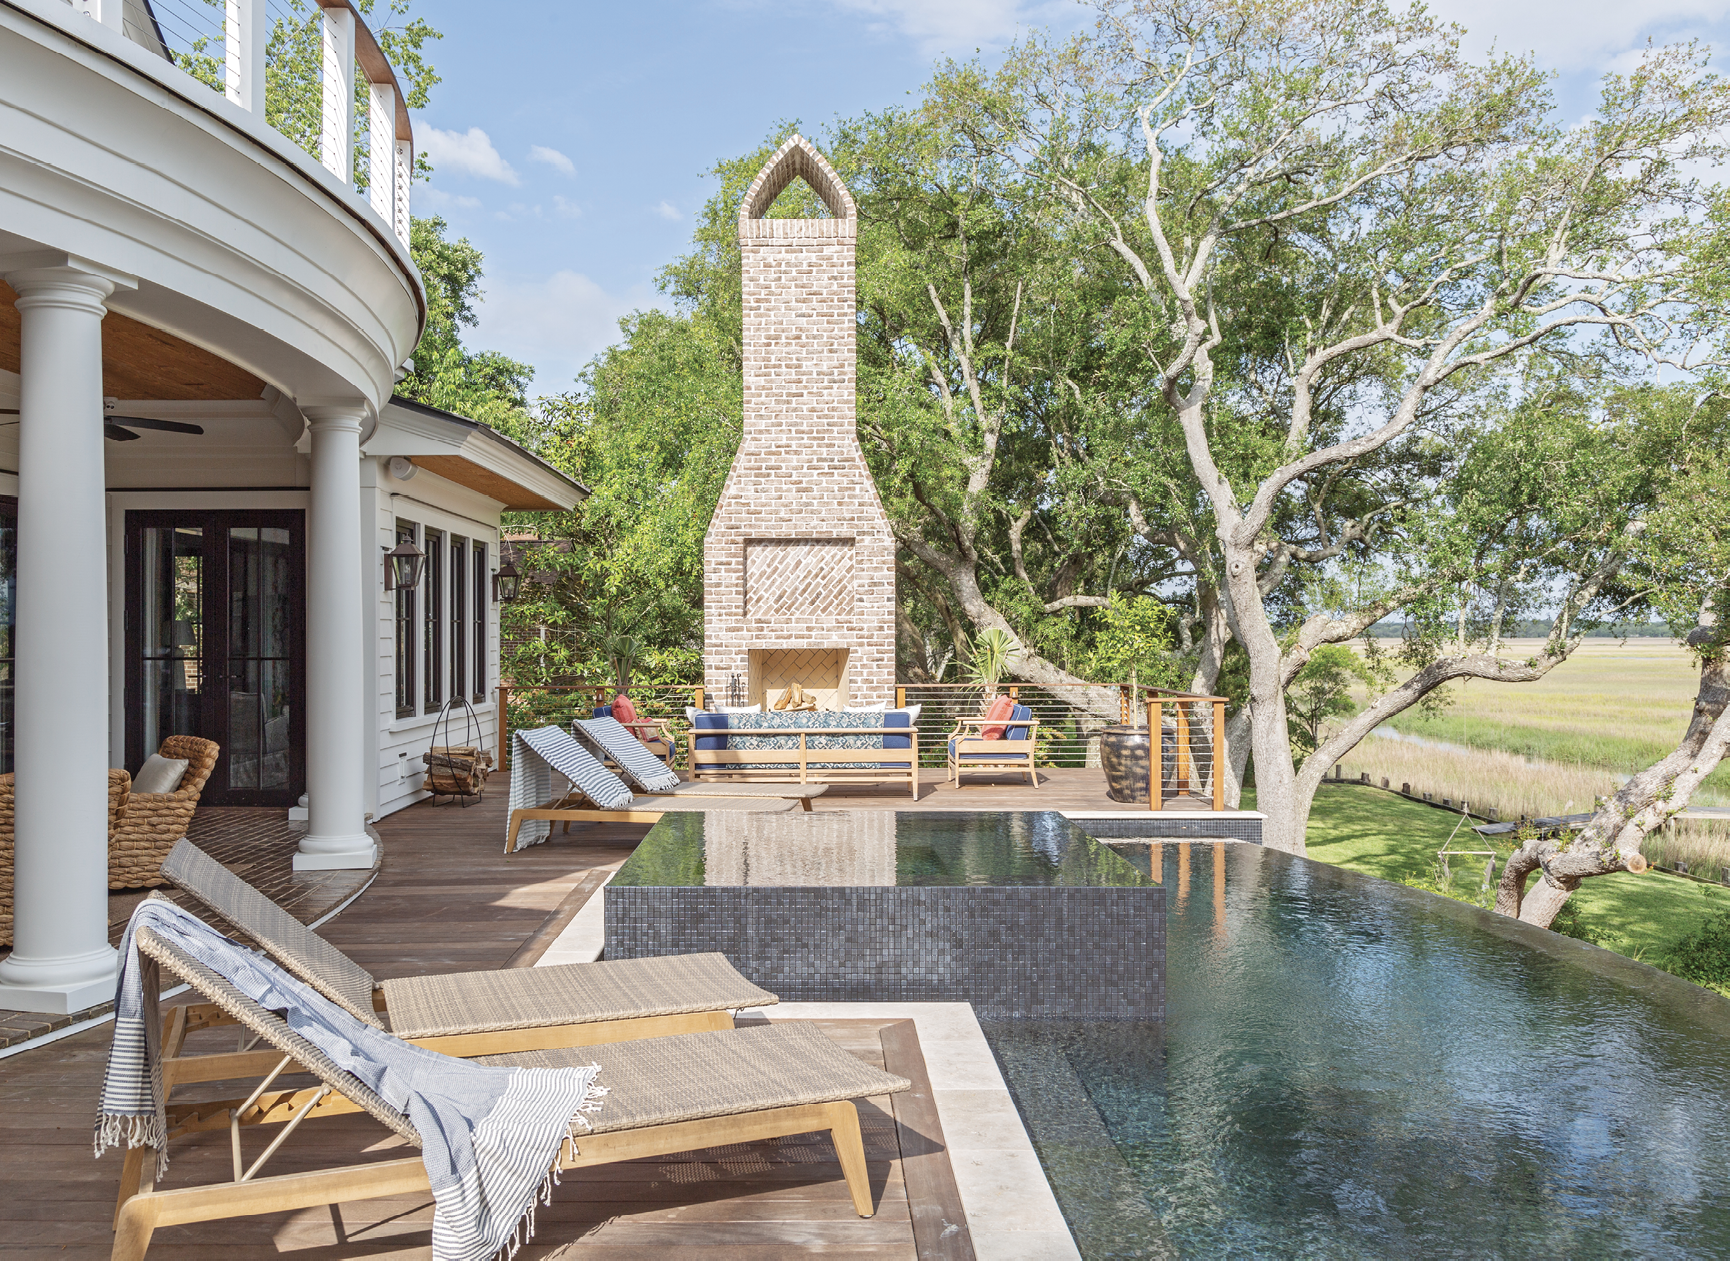 A traditional brick fireplace presides over the expansive pool deck. Its design, and other brickwork throughout the home, was inspired by Middleton Place, where Martha worked at as a teenager.